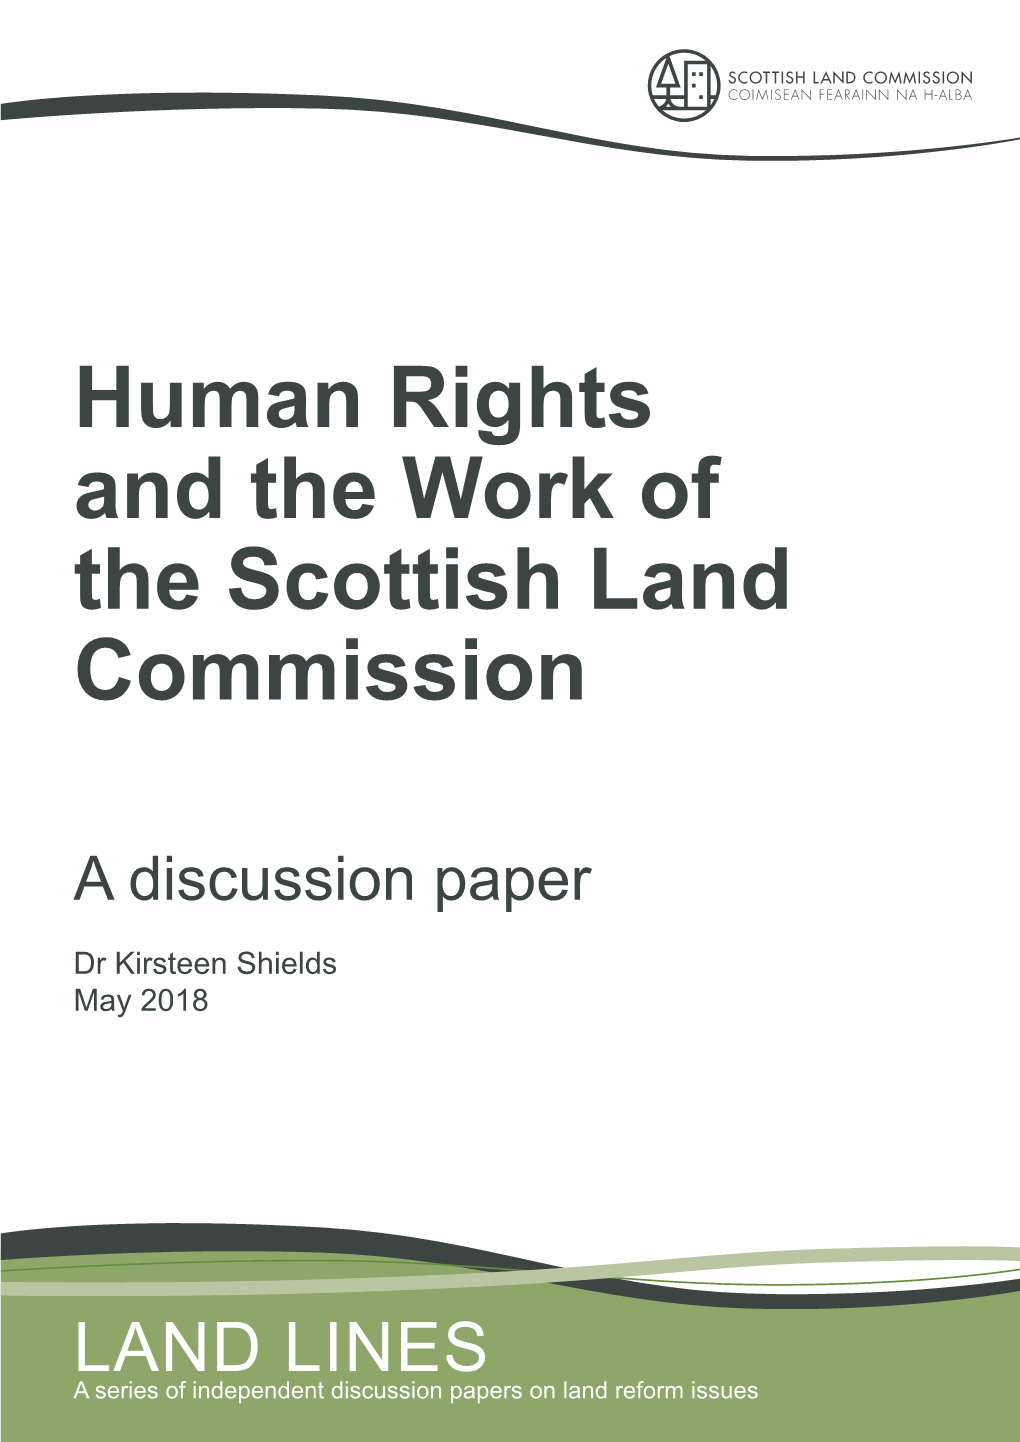 Human Rights and the Work of the Scottish Land Commission